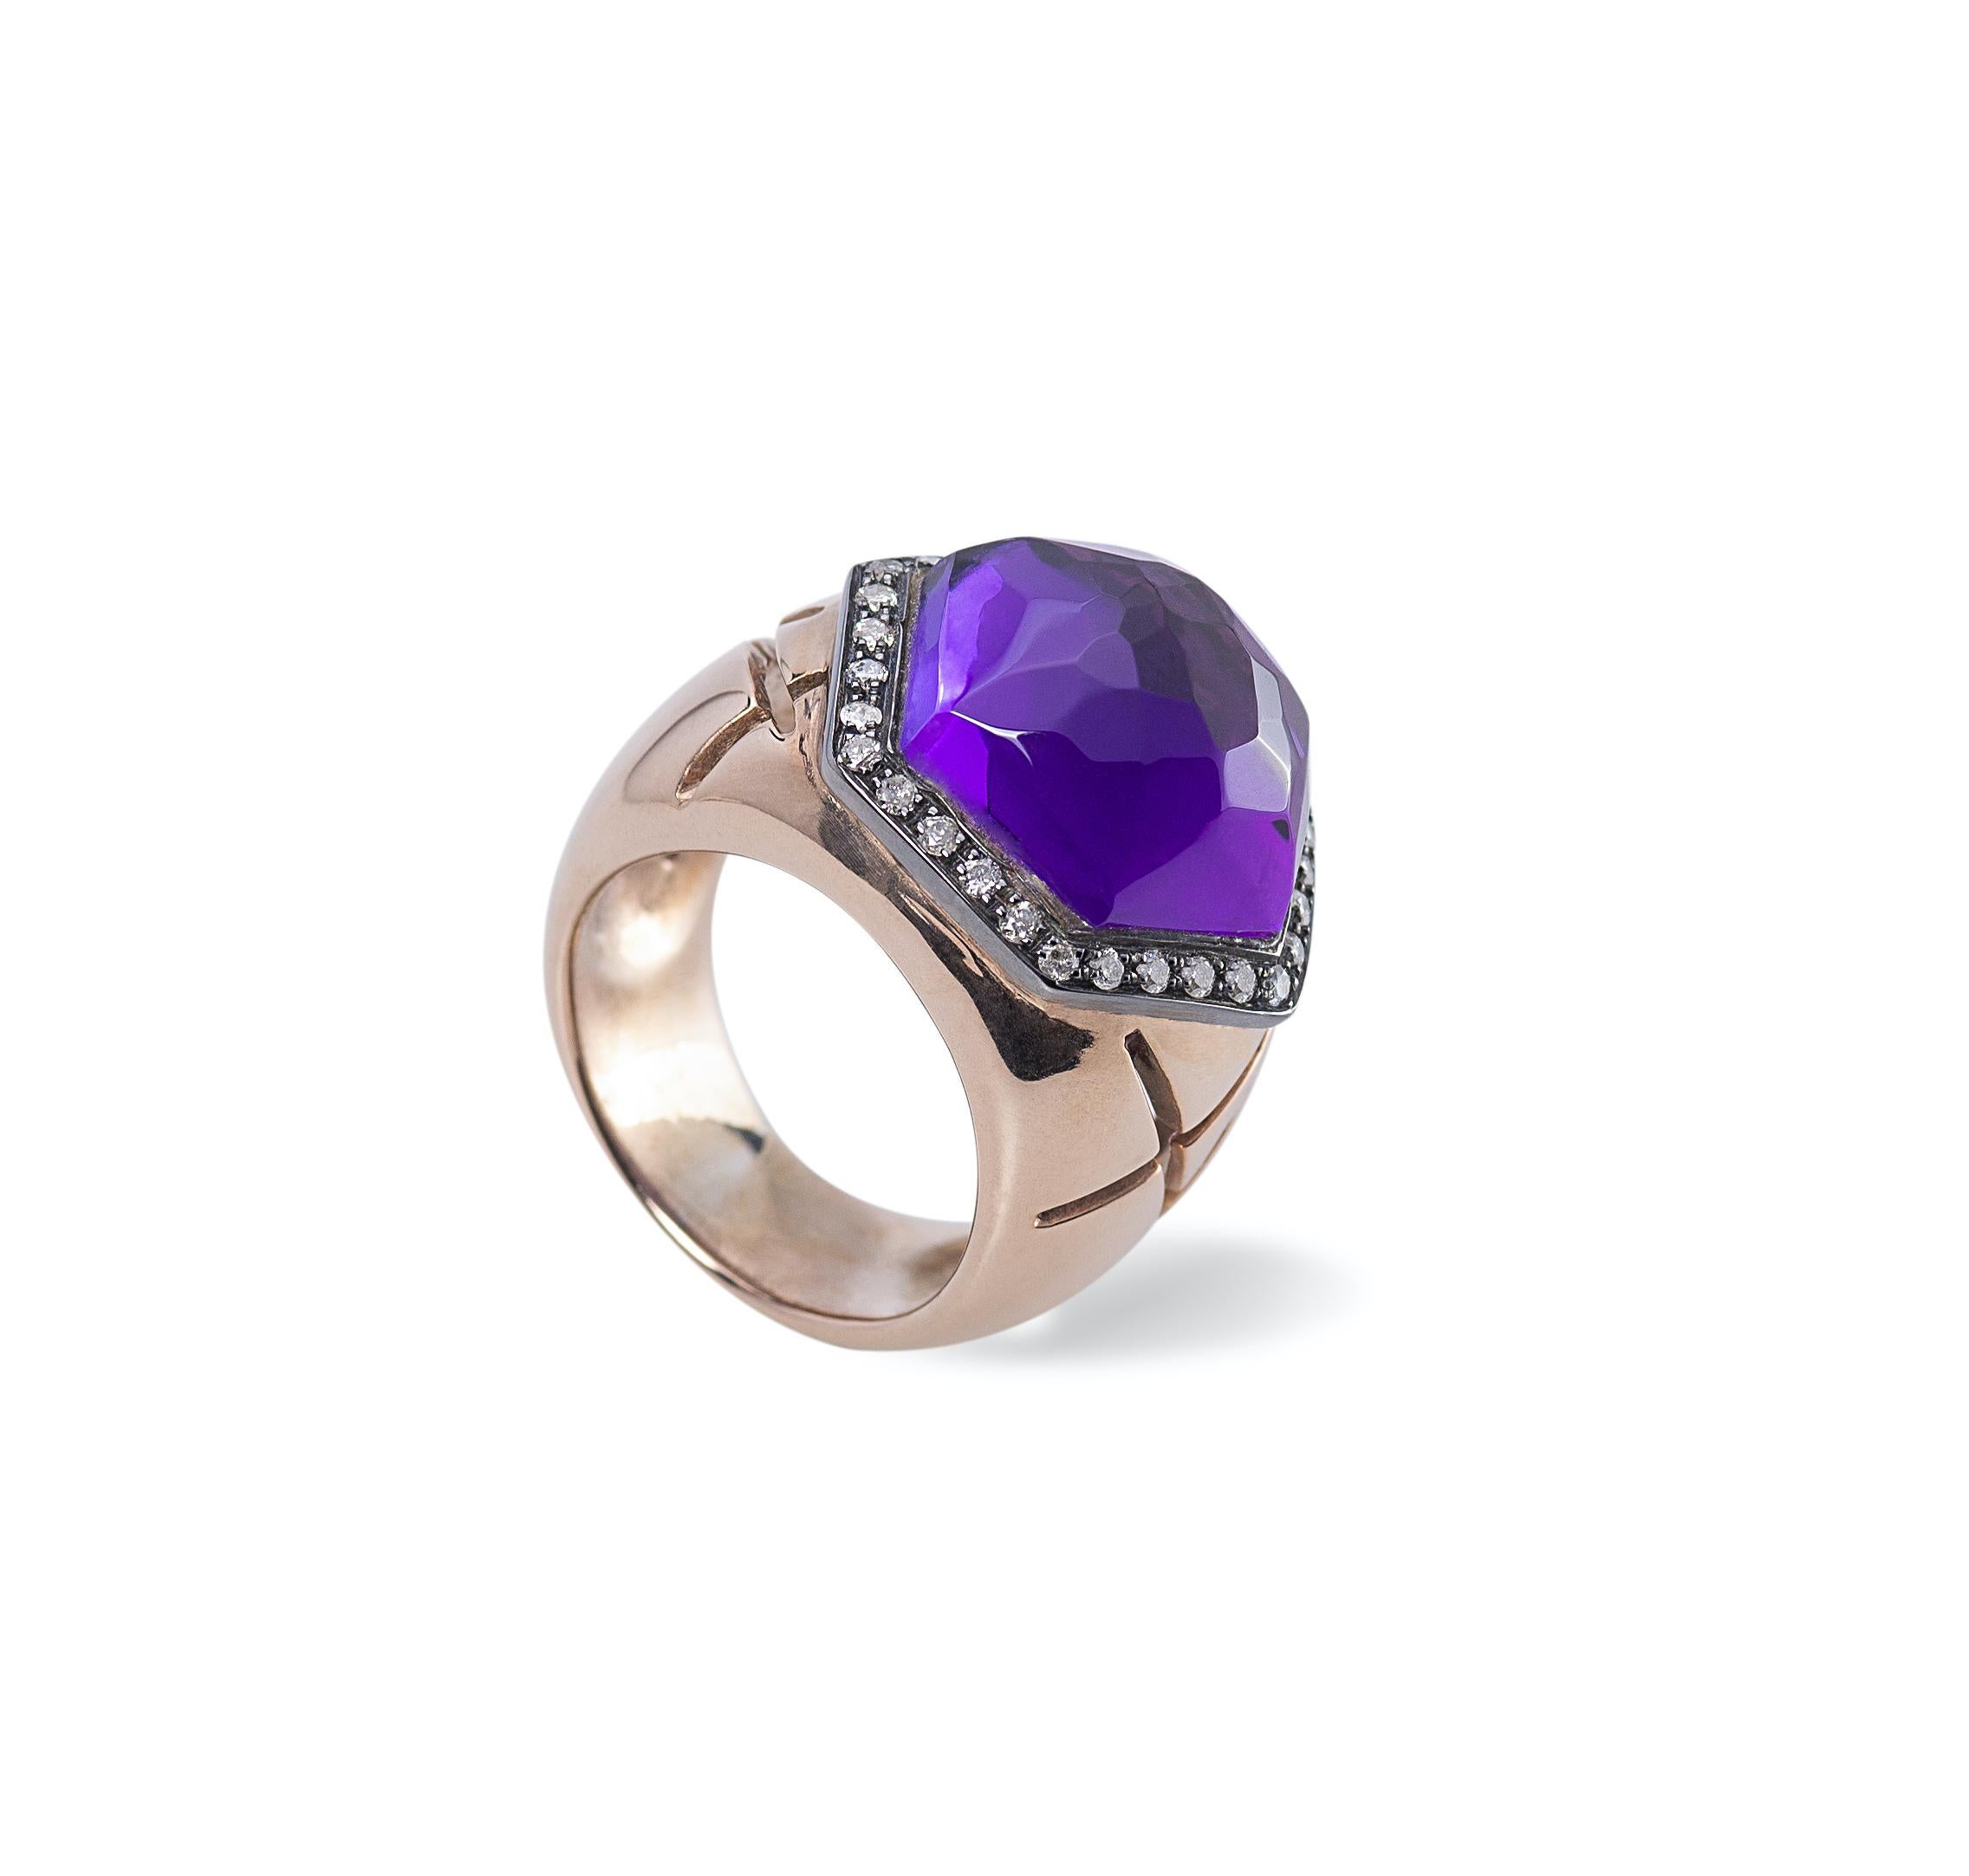 Rossella Ugolini Hexagonal Amethyst Cocktail Ring 18K Gold and Diamonds For Sale 10